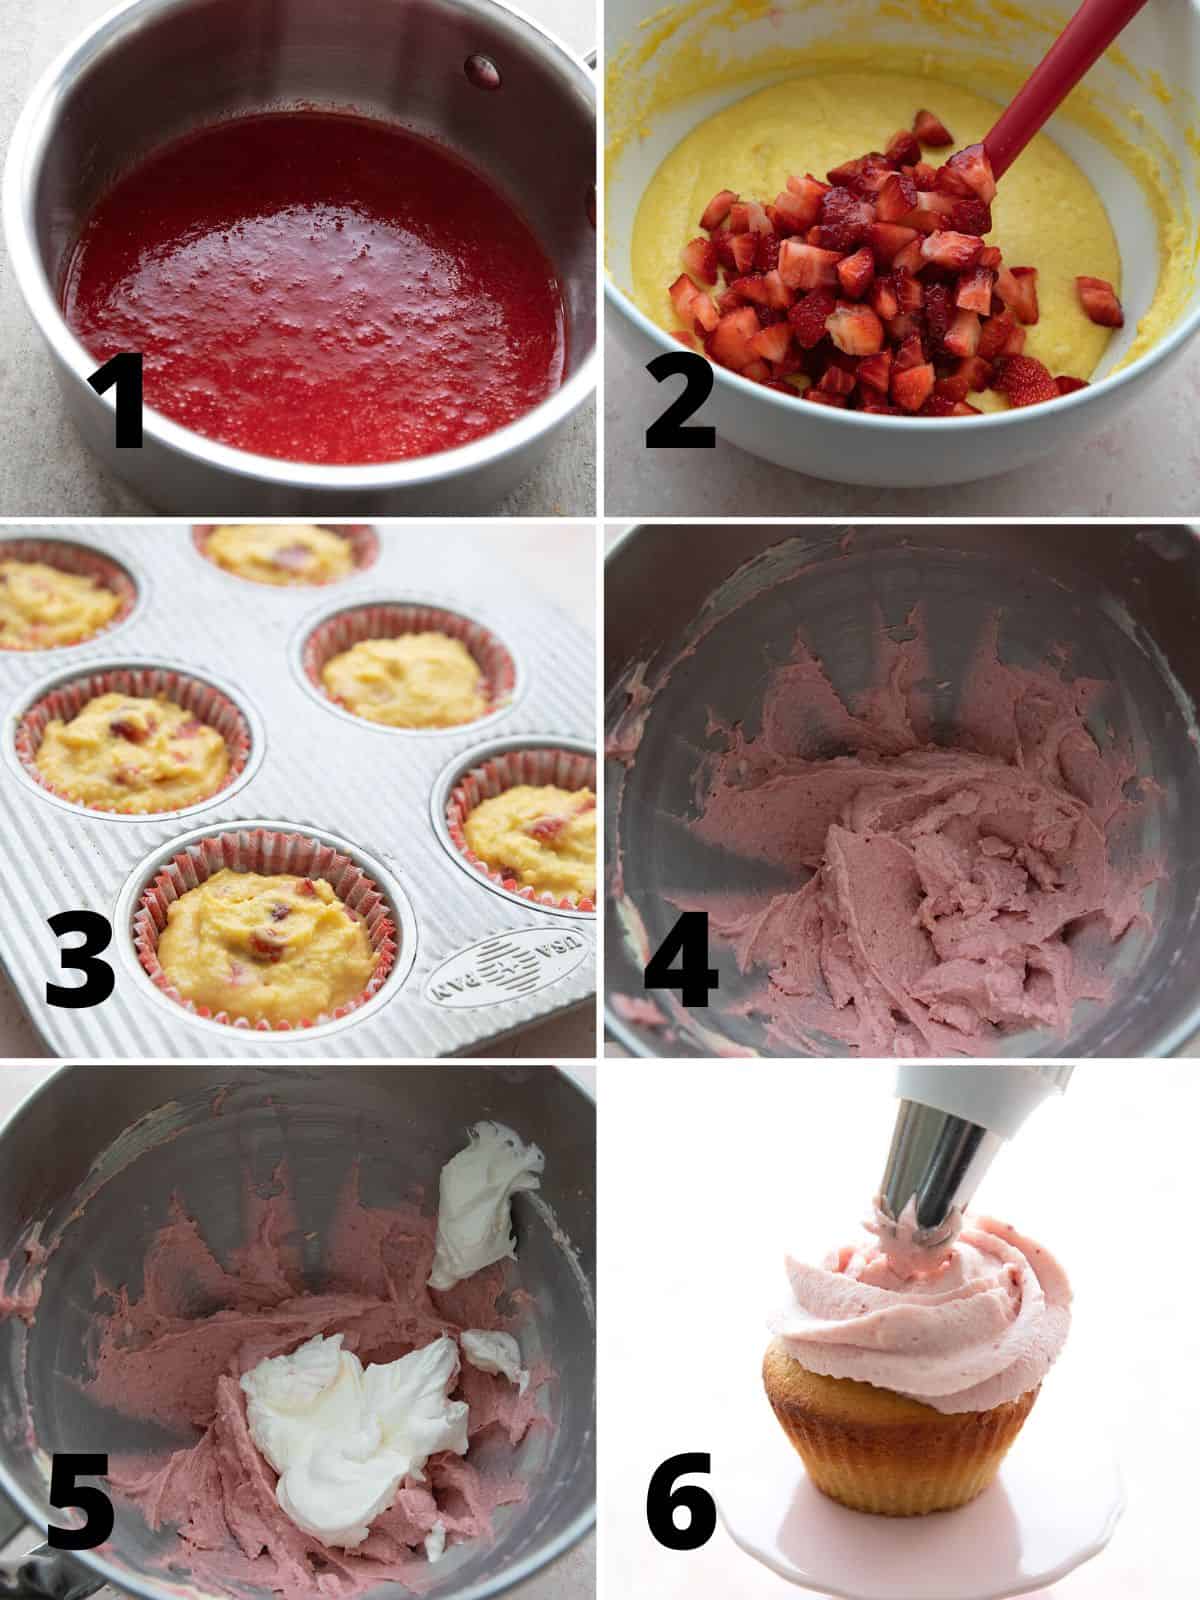 A collage of 6 images showing how to make Keto Strawberry Cupcakes.